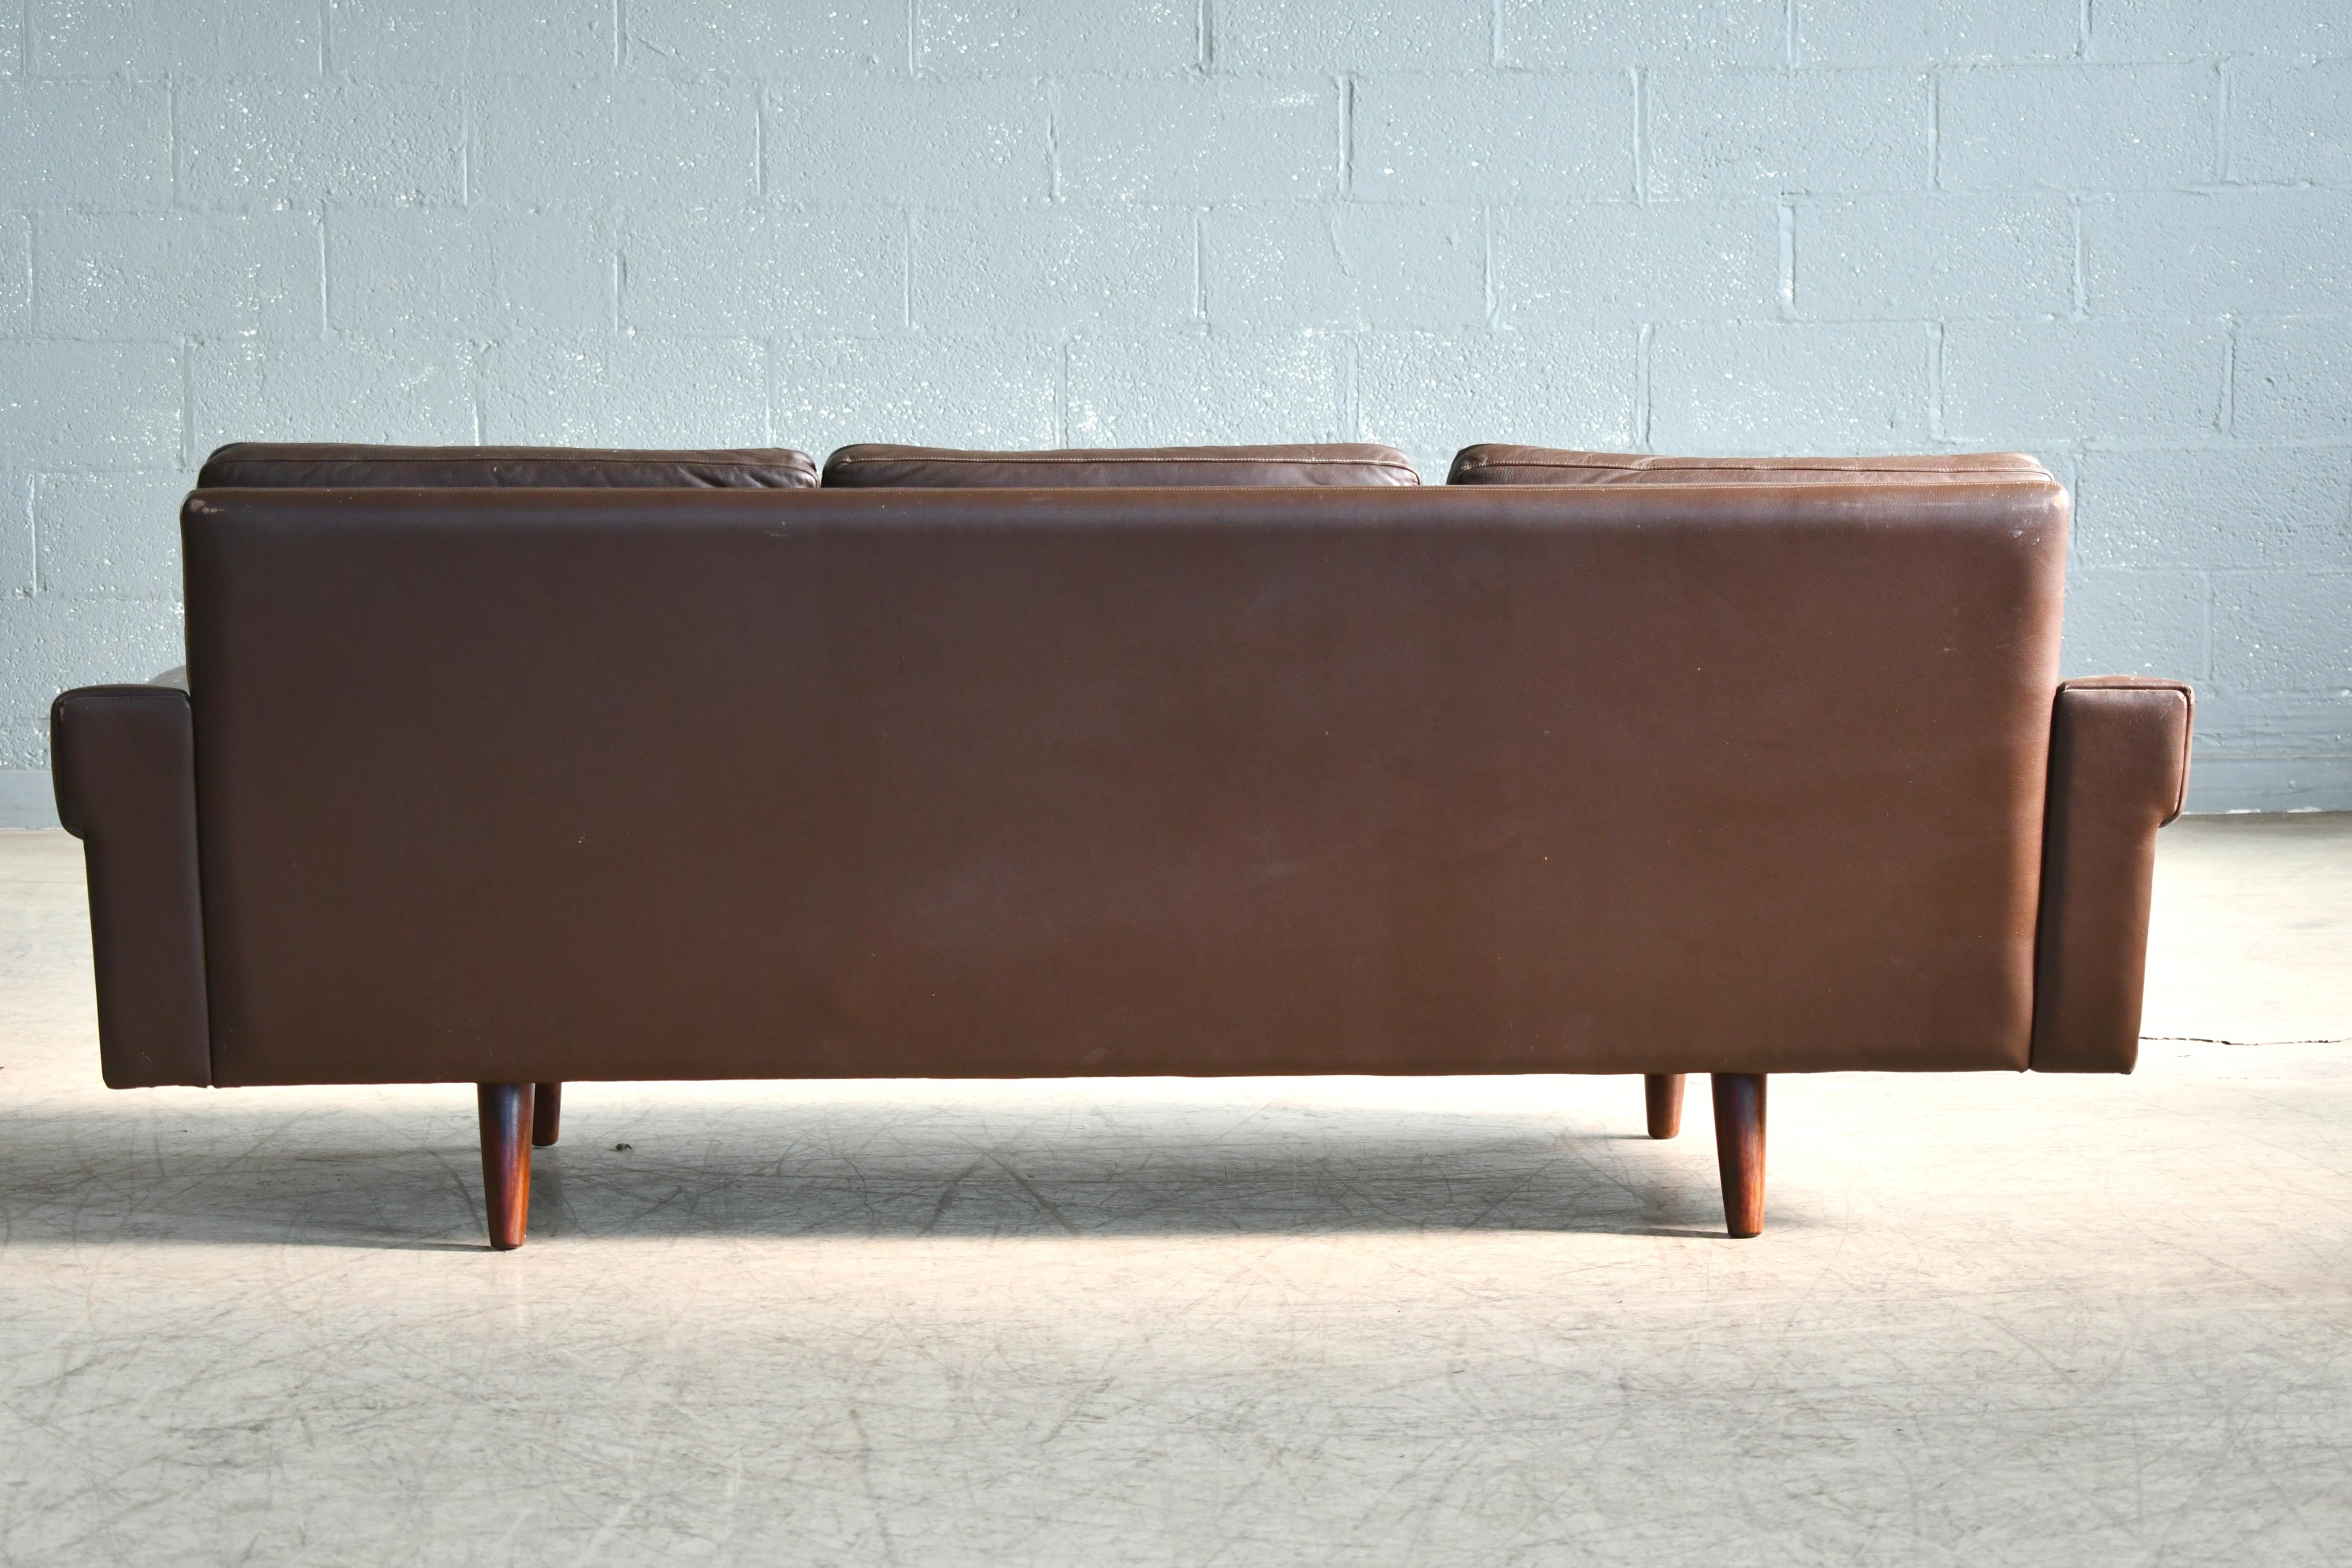 Classic Danish 1960s Midcentury Sofa in Chestnut Colored Leather by Georg Thams 6